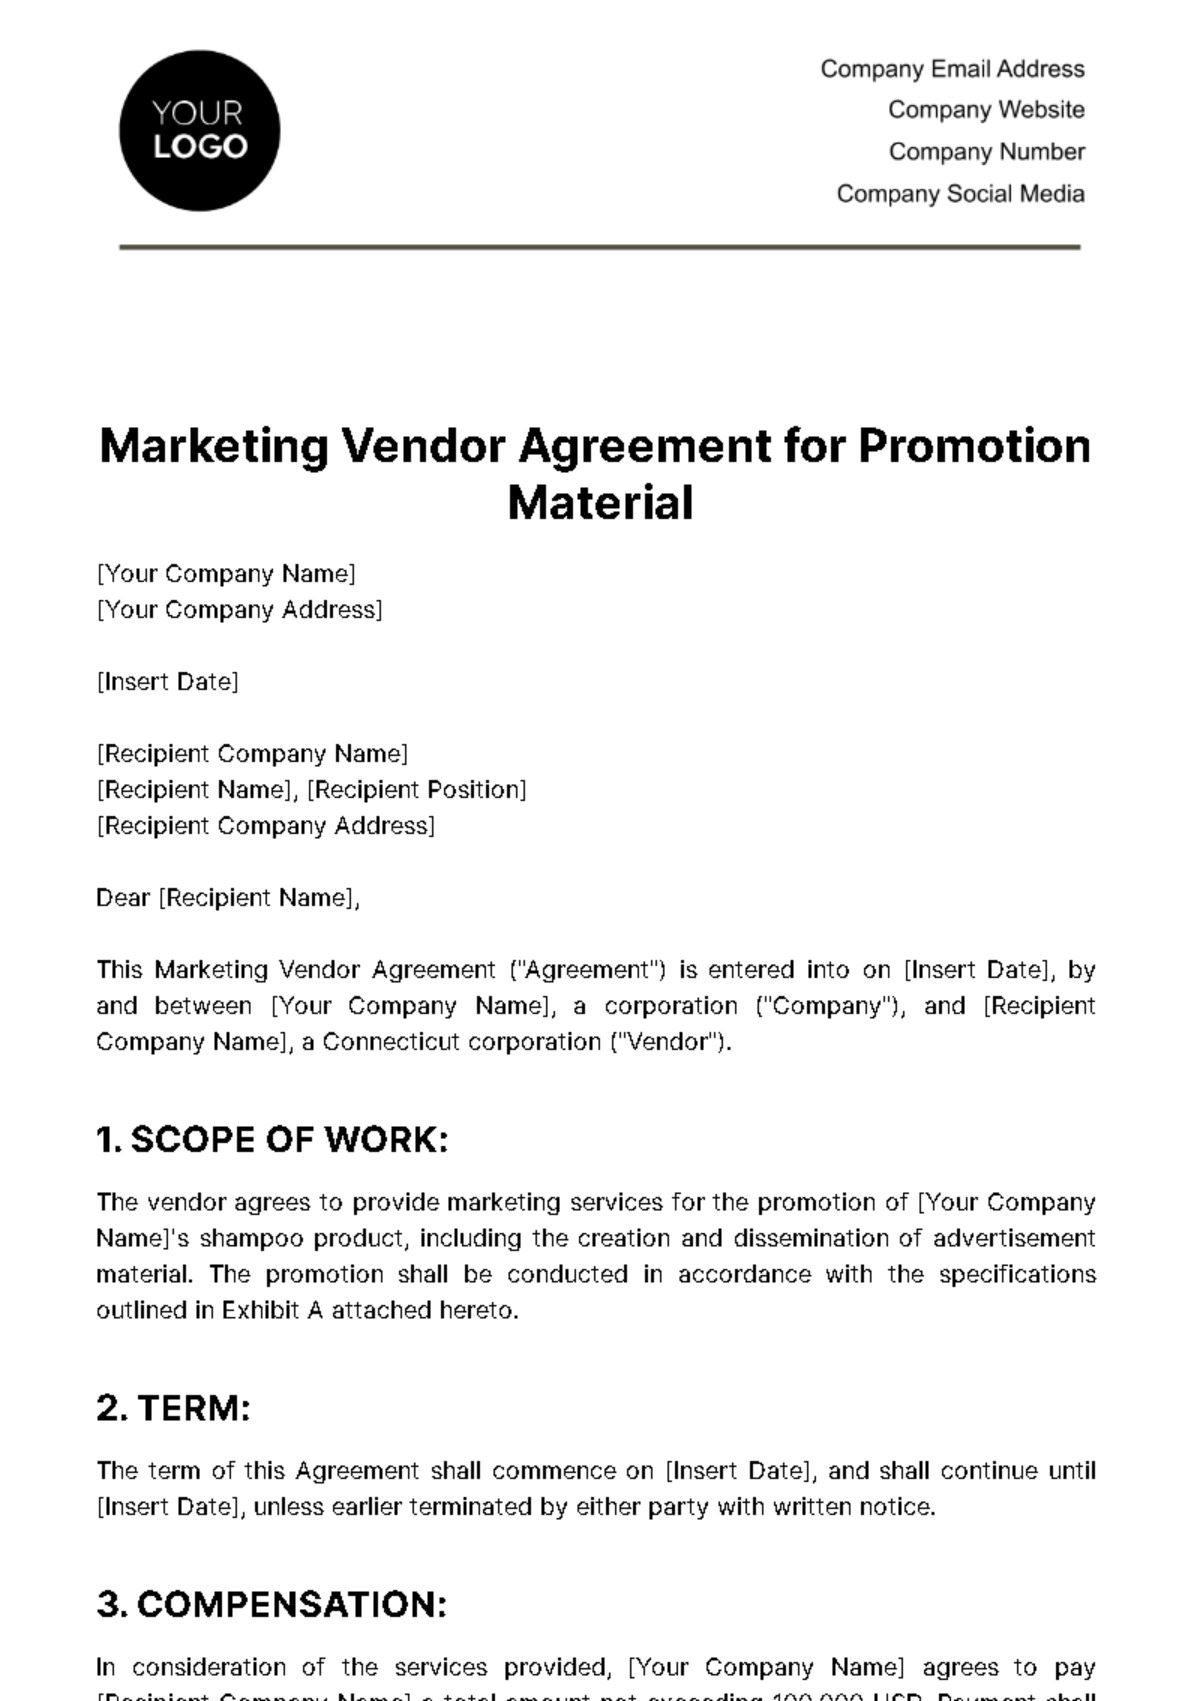 Free Marketing Vendor Agreement for Promotion Material Template